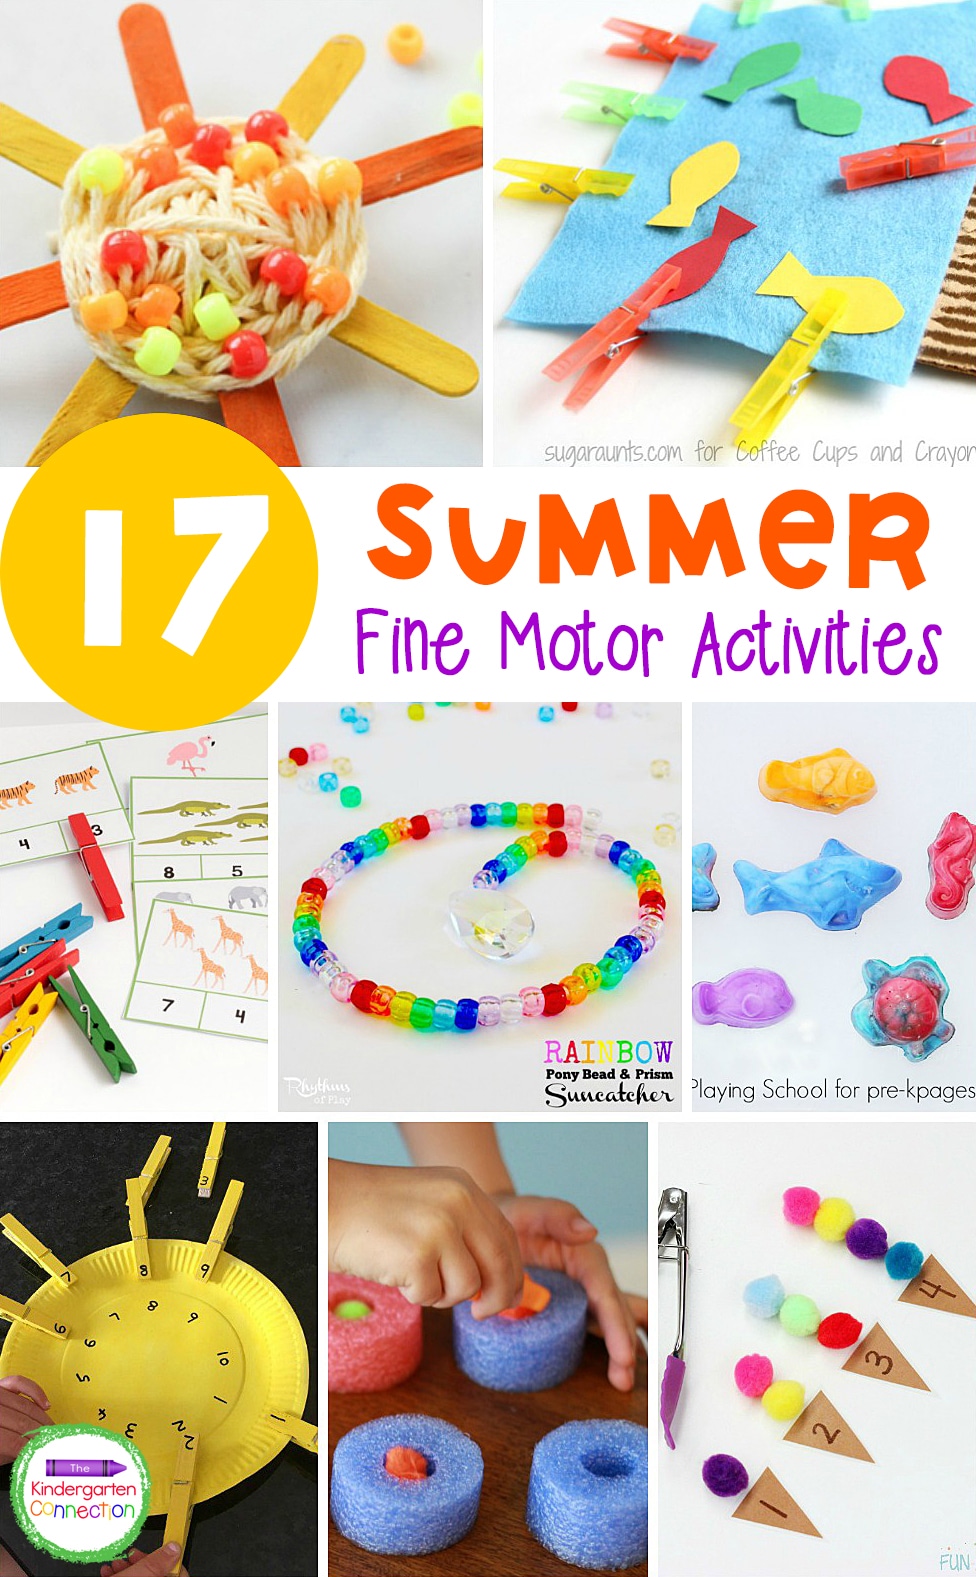 These summer fine motor activities will help kids strengthen finger muscles that will help with skills like writing, cutting, and more!